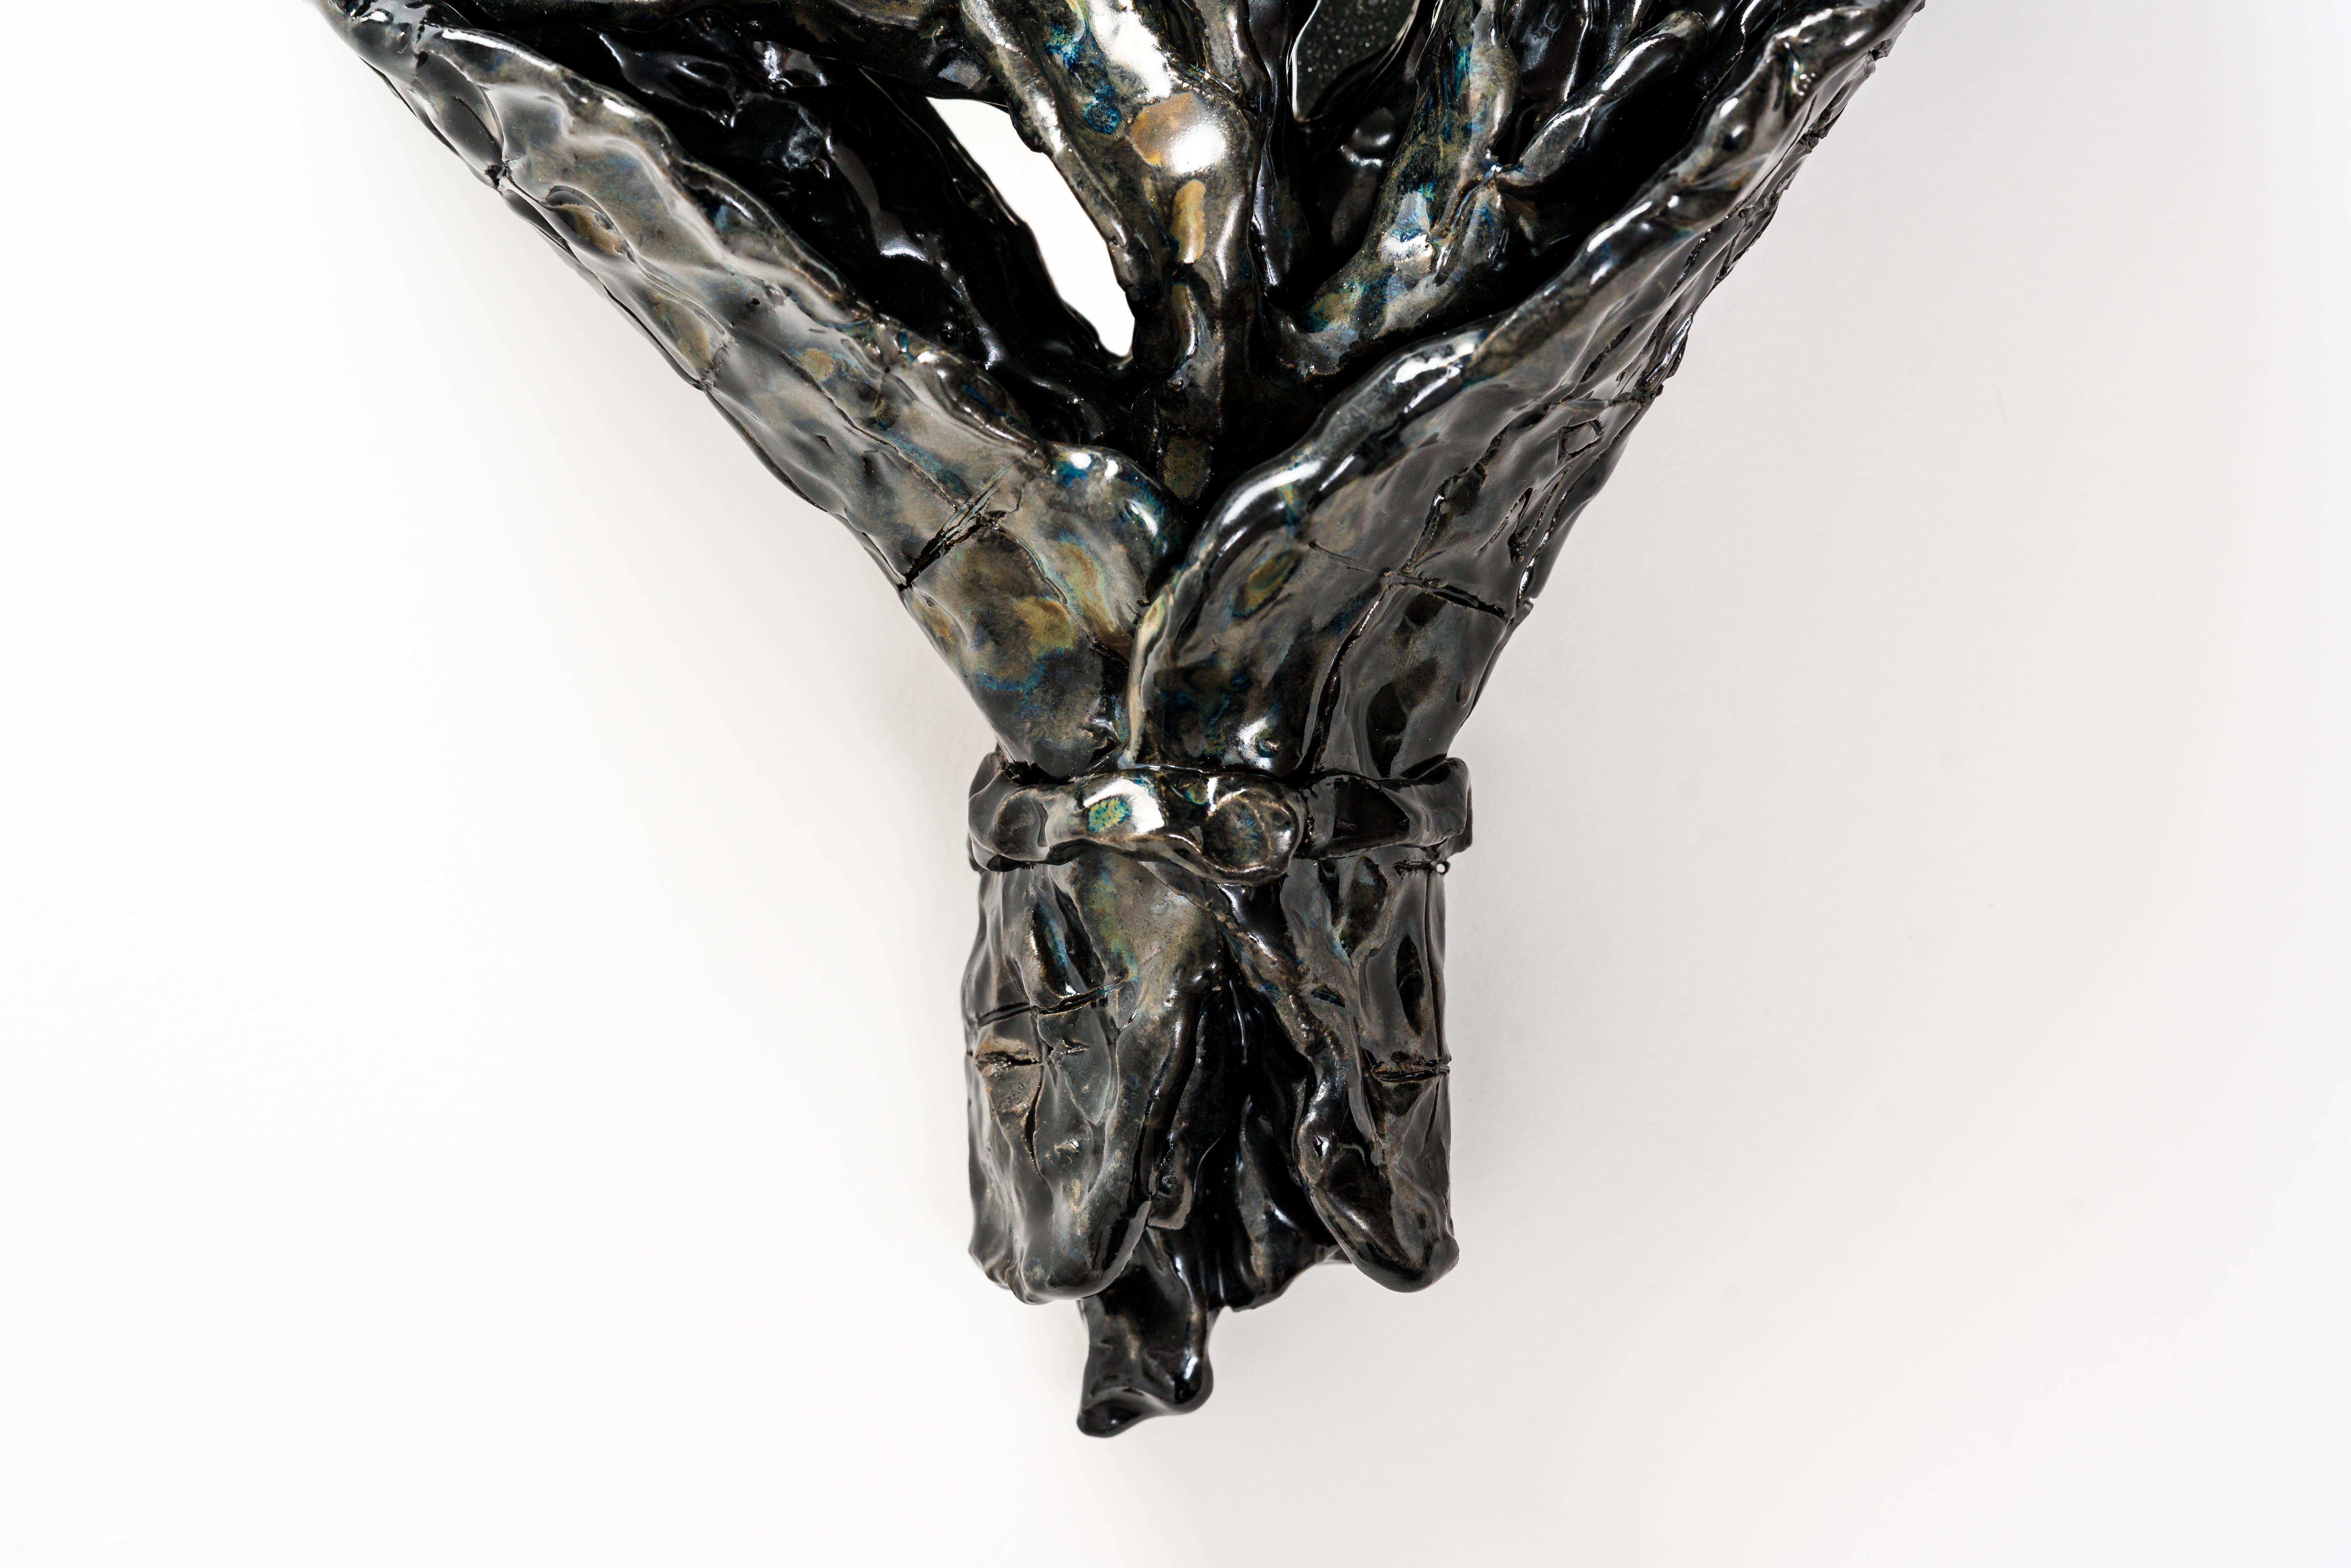 One-of-a-kind hand-built glazed ceramic decorative wall mirror, 'Moonlight (Black)' by contemporary ceramicist and artist Jaye Kim. 

This surrealistic wall mirror is sculpted in the form of a bouquet of flowers against a mirror, which provides